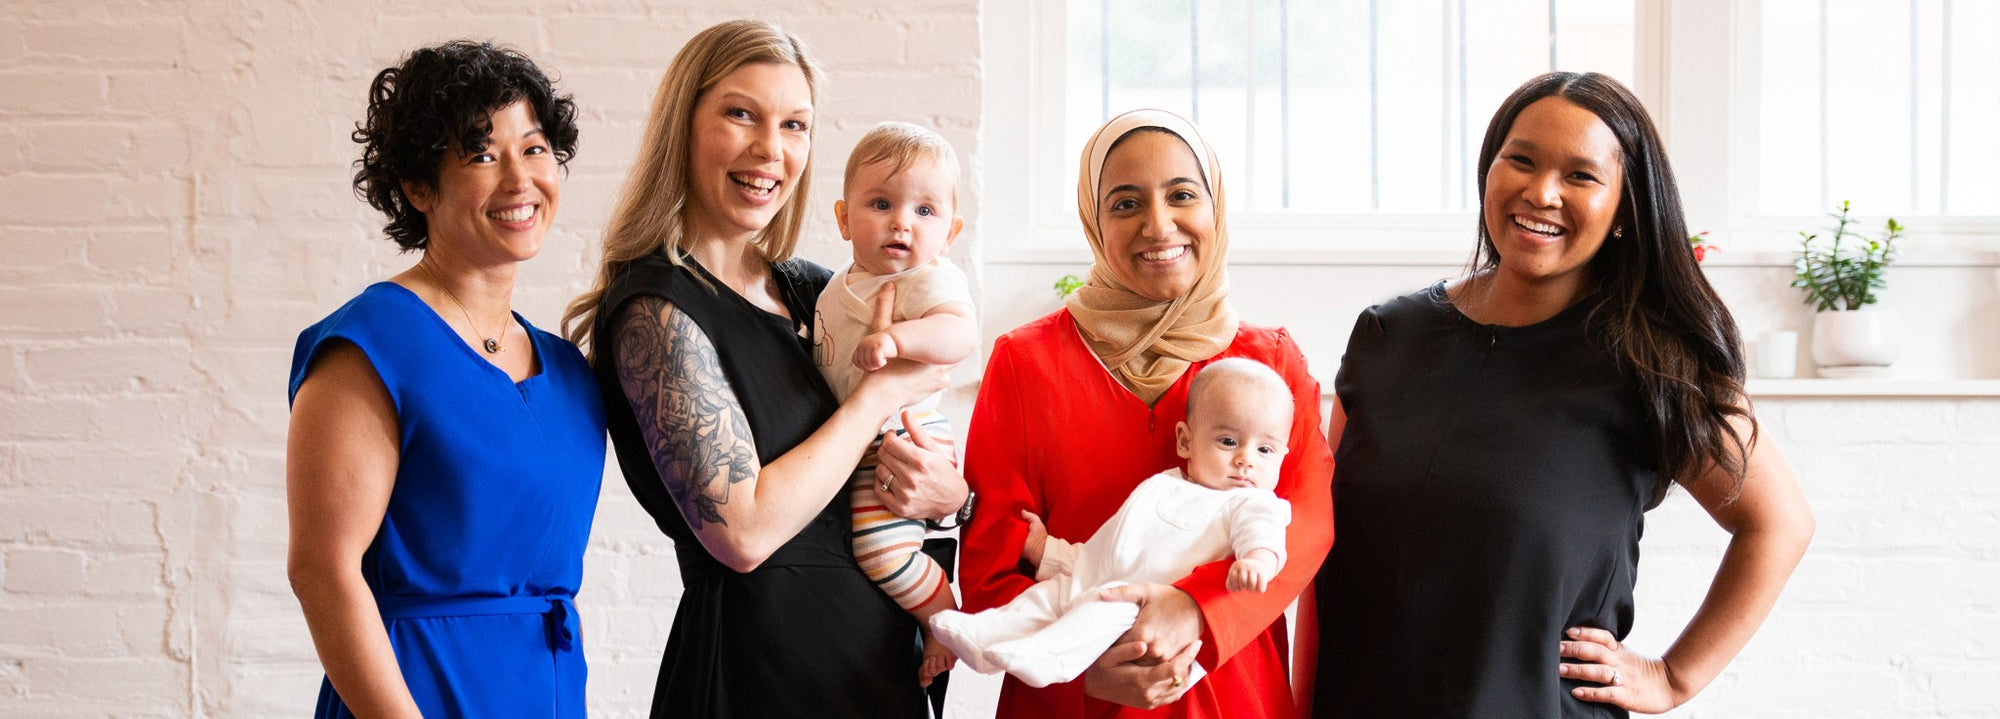 Four moms modeling pumping and nursing clothing and holding babies